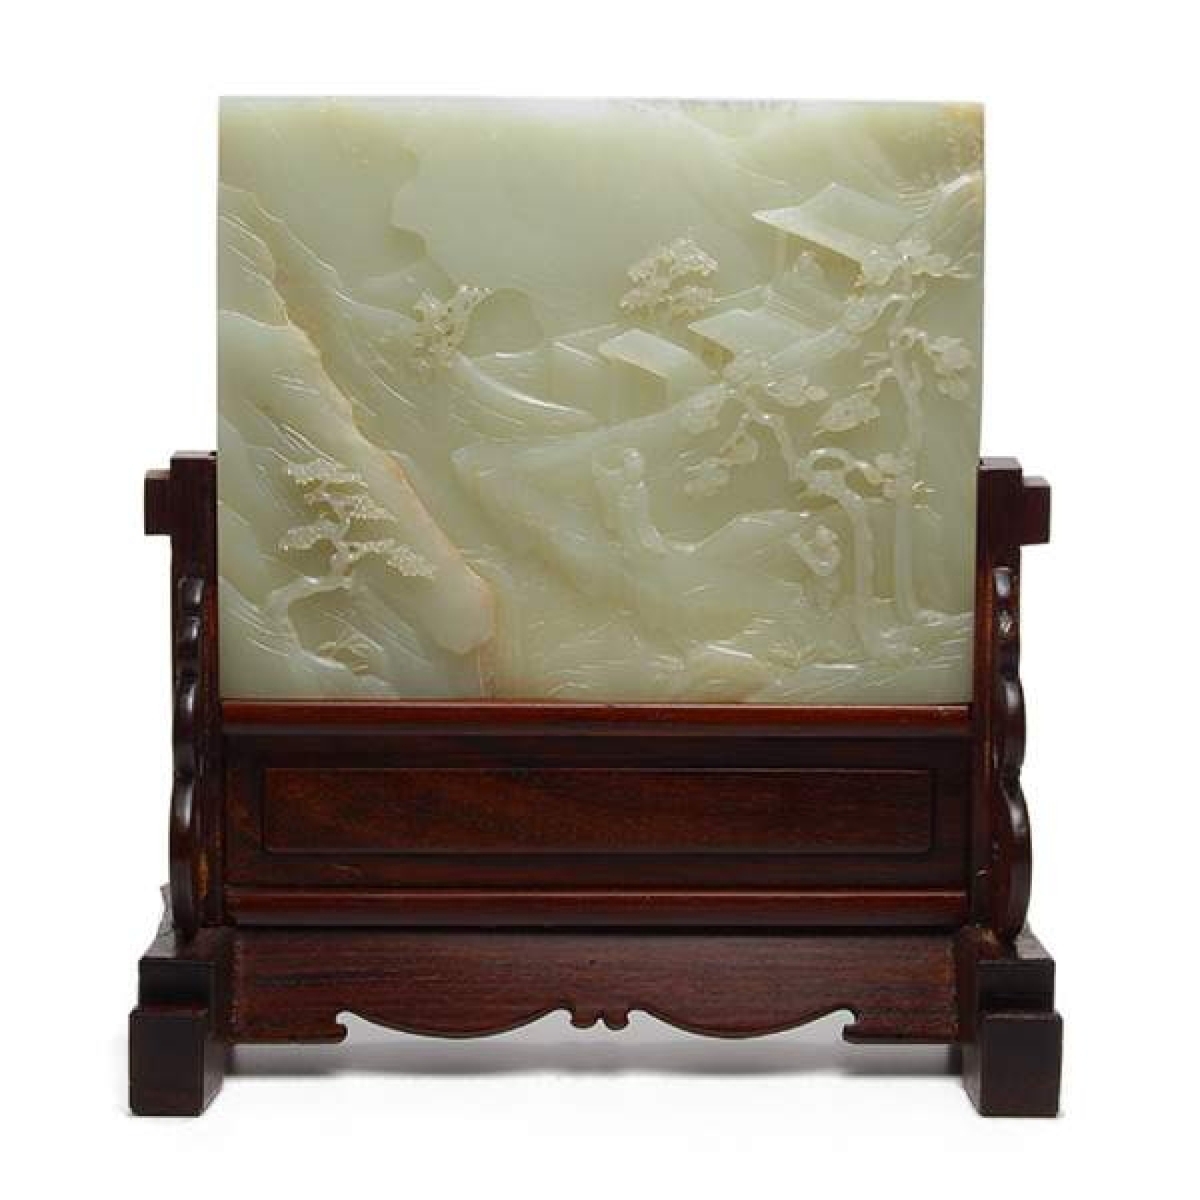 A jade table screen sold for $100,300.